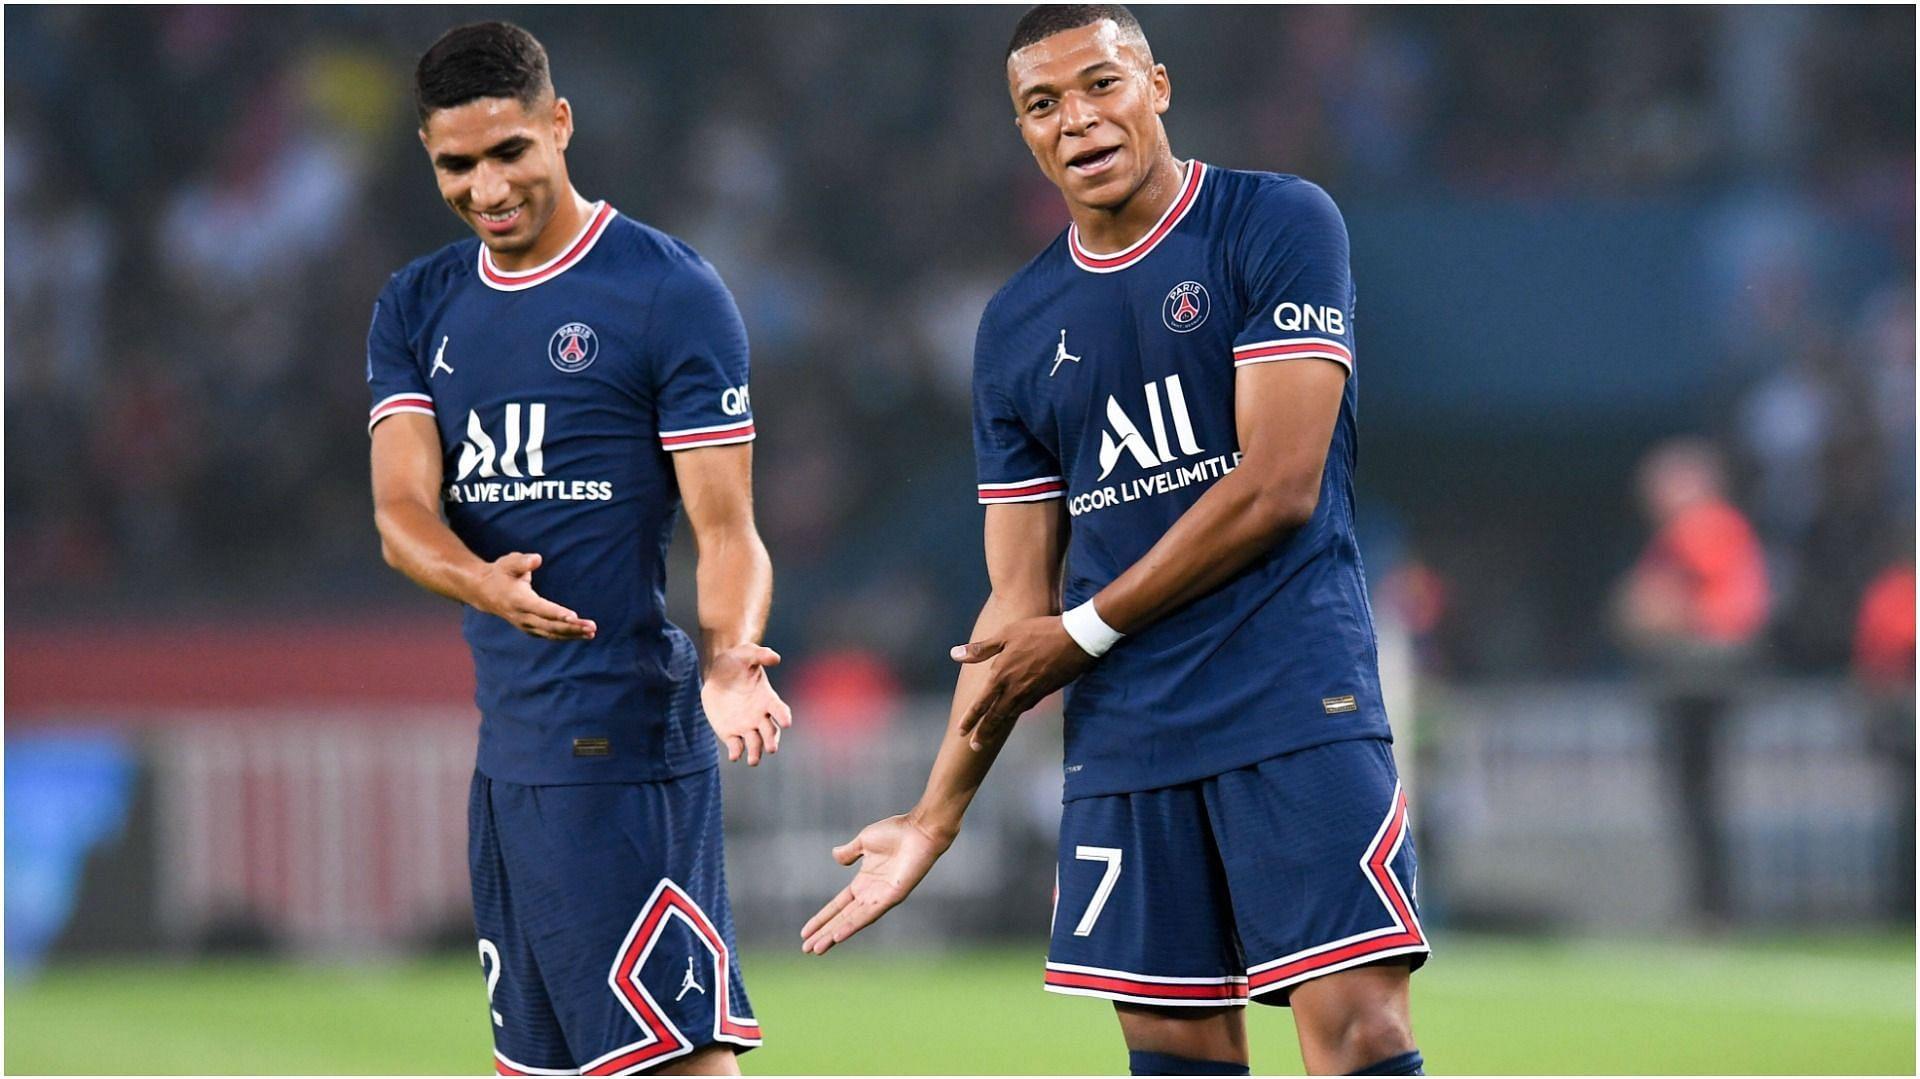 French Superstar Kylian Mbappe Makes An Appearance On Psg Teammate